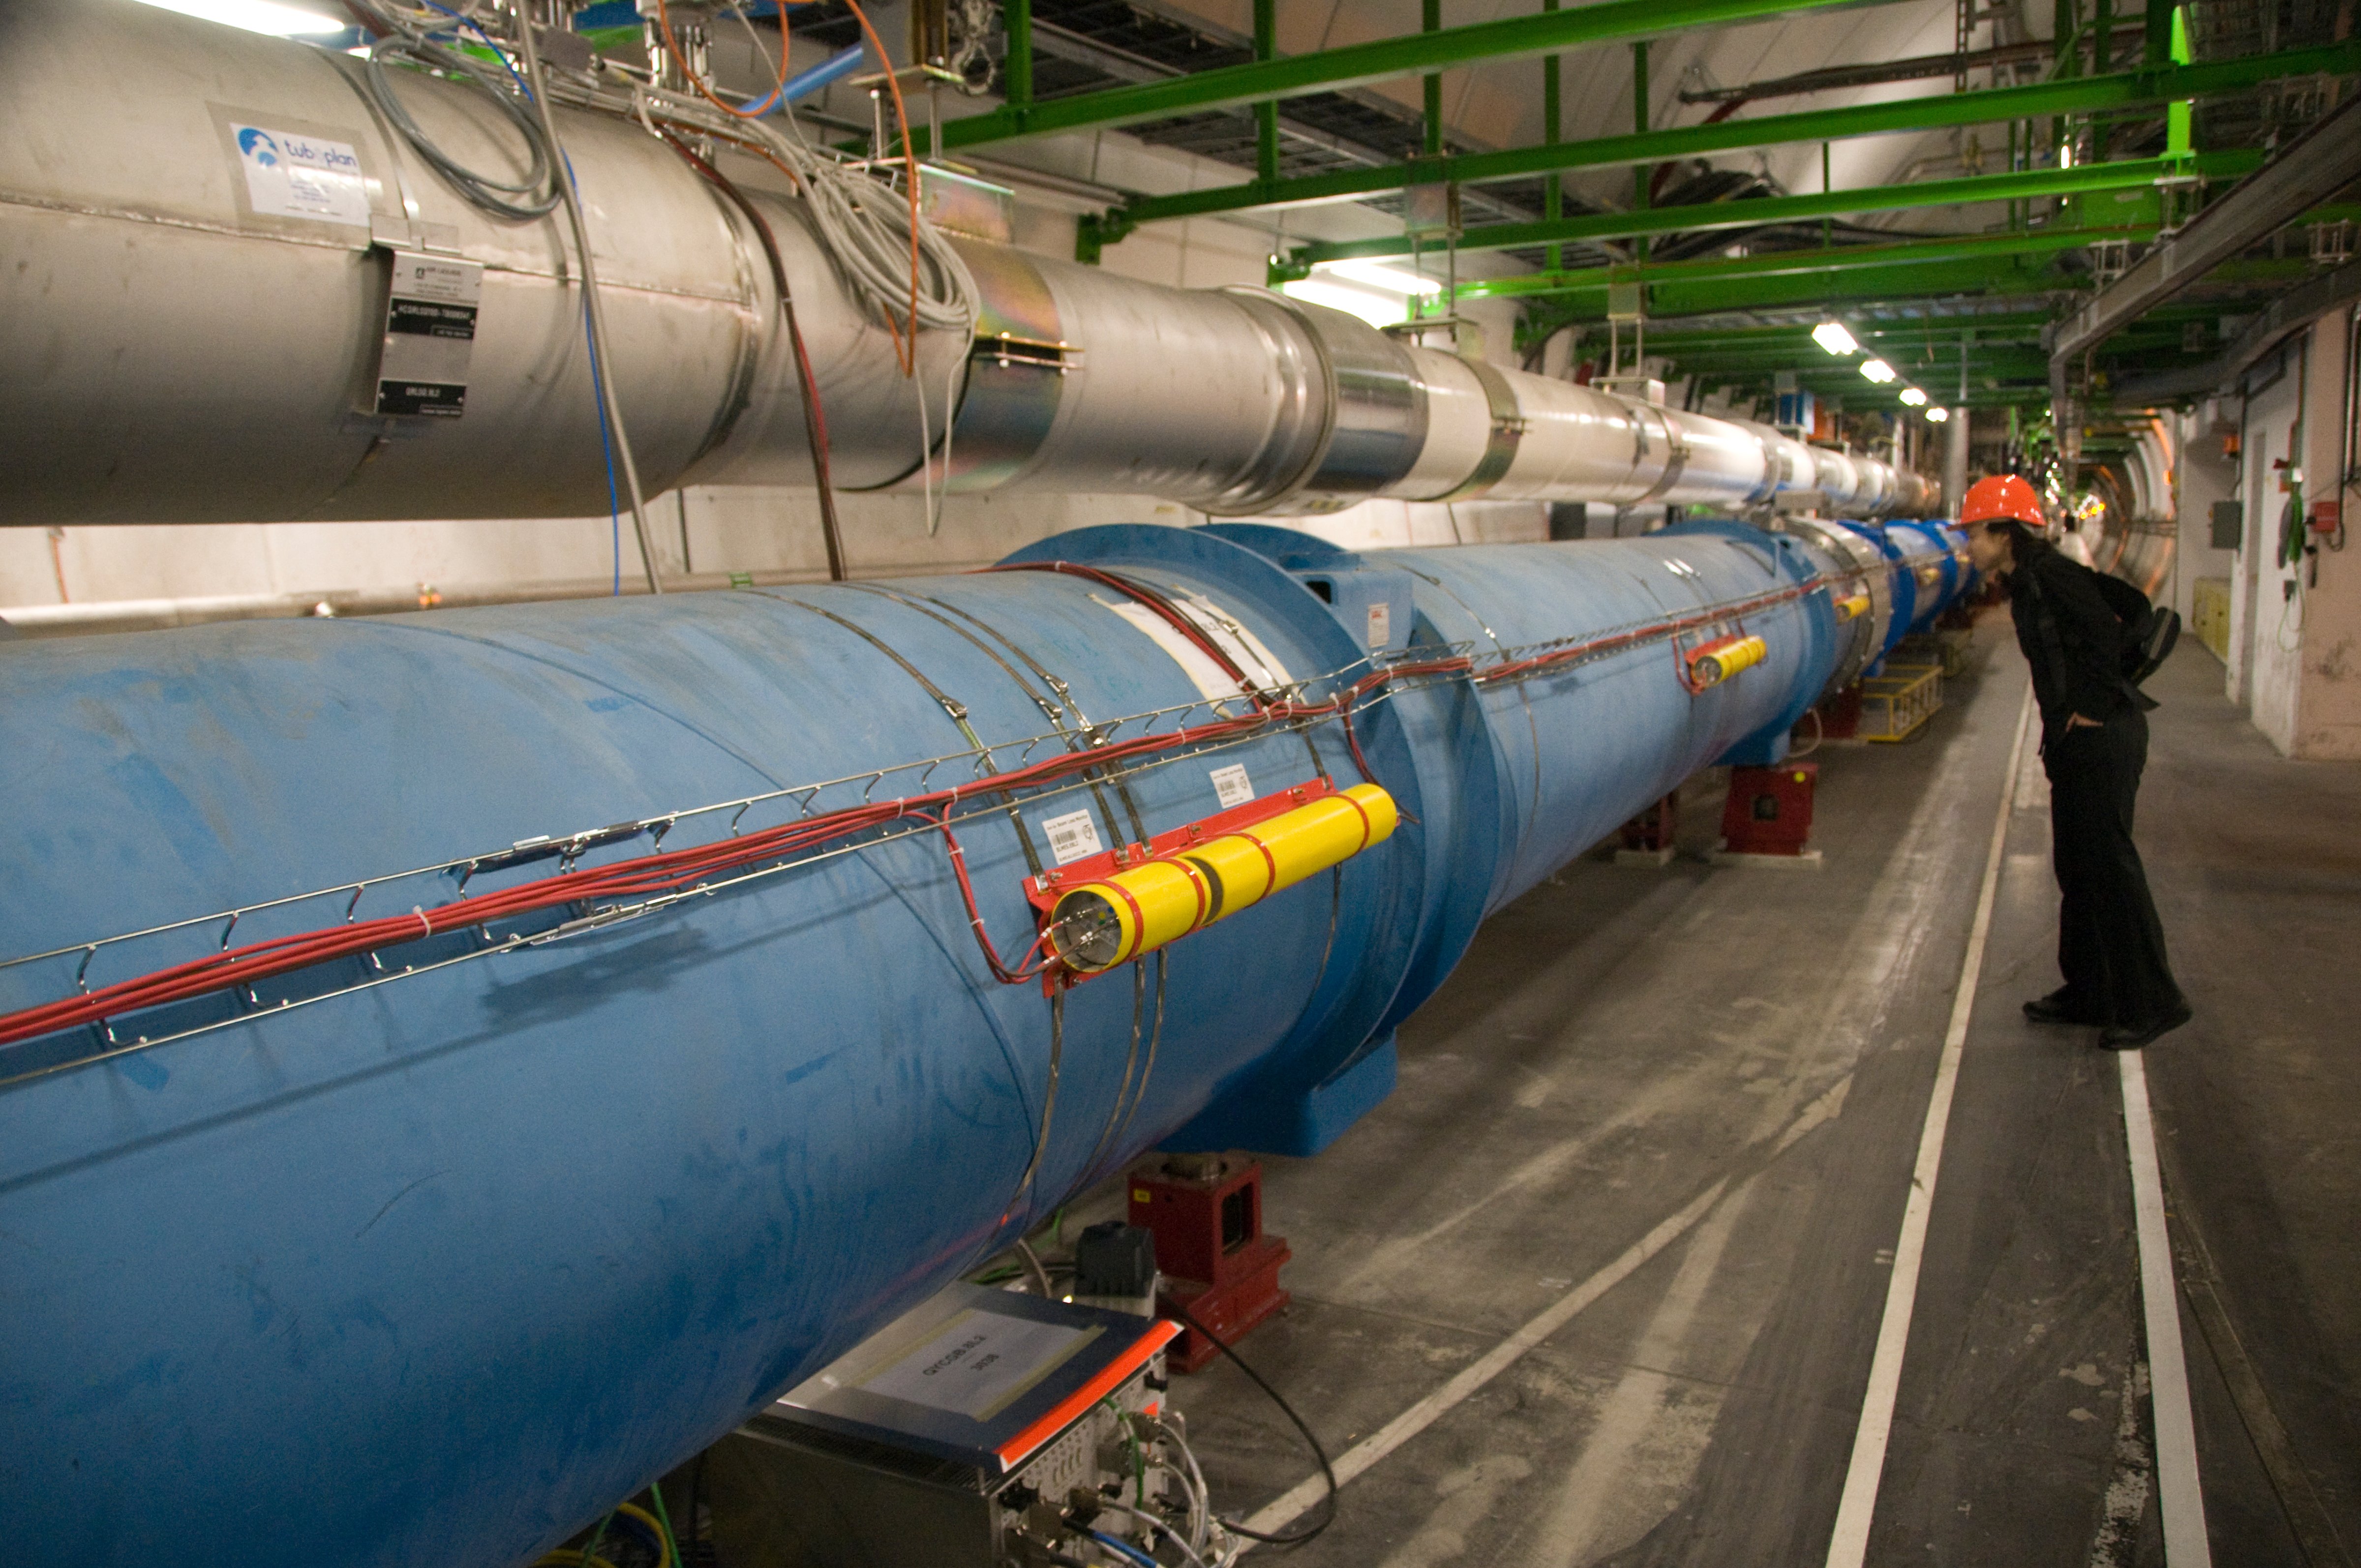 A woman looking at Large Hadron Collider, Geneva, Switzerland (Frans Lanting—Getty Images/Mint Images RM)